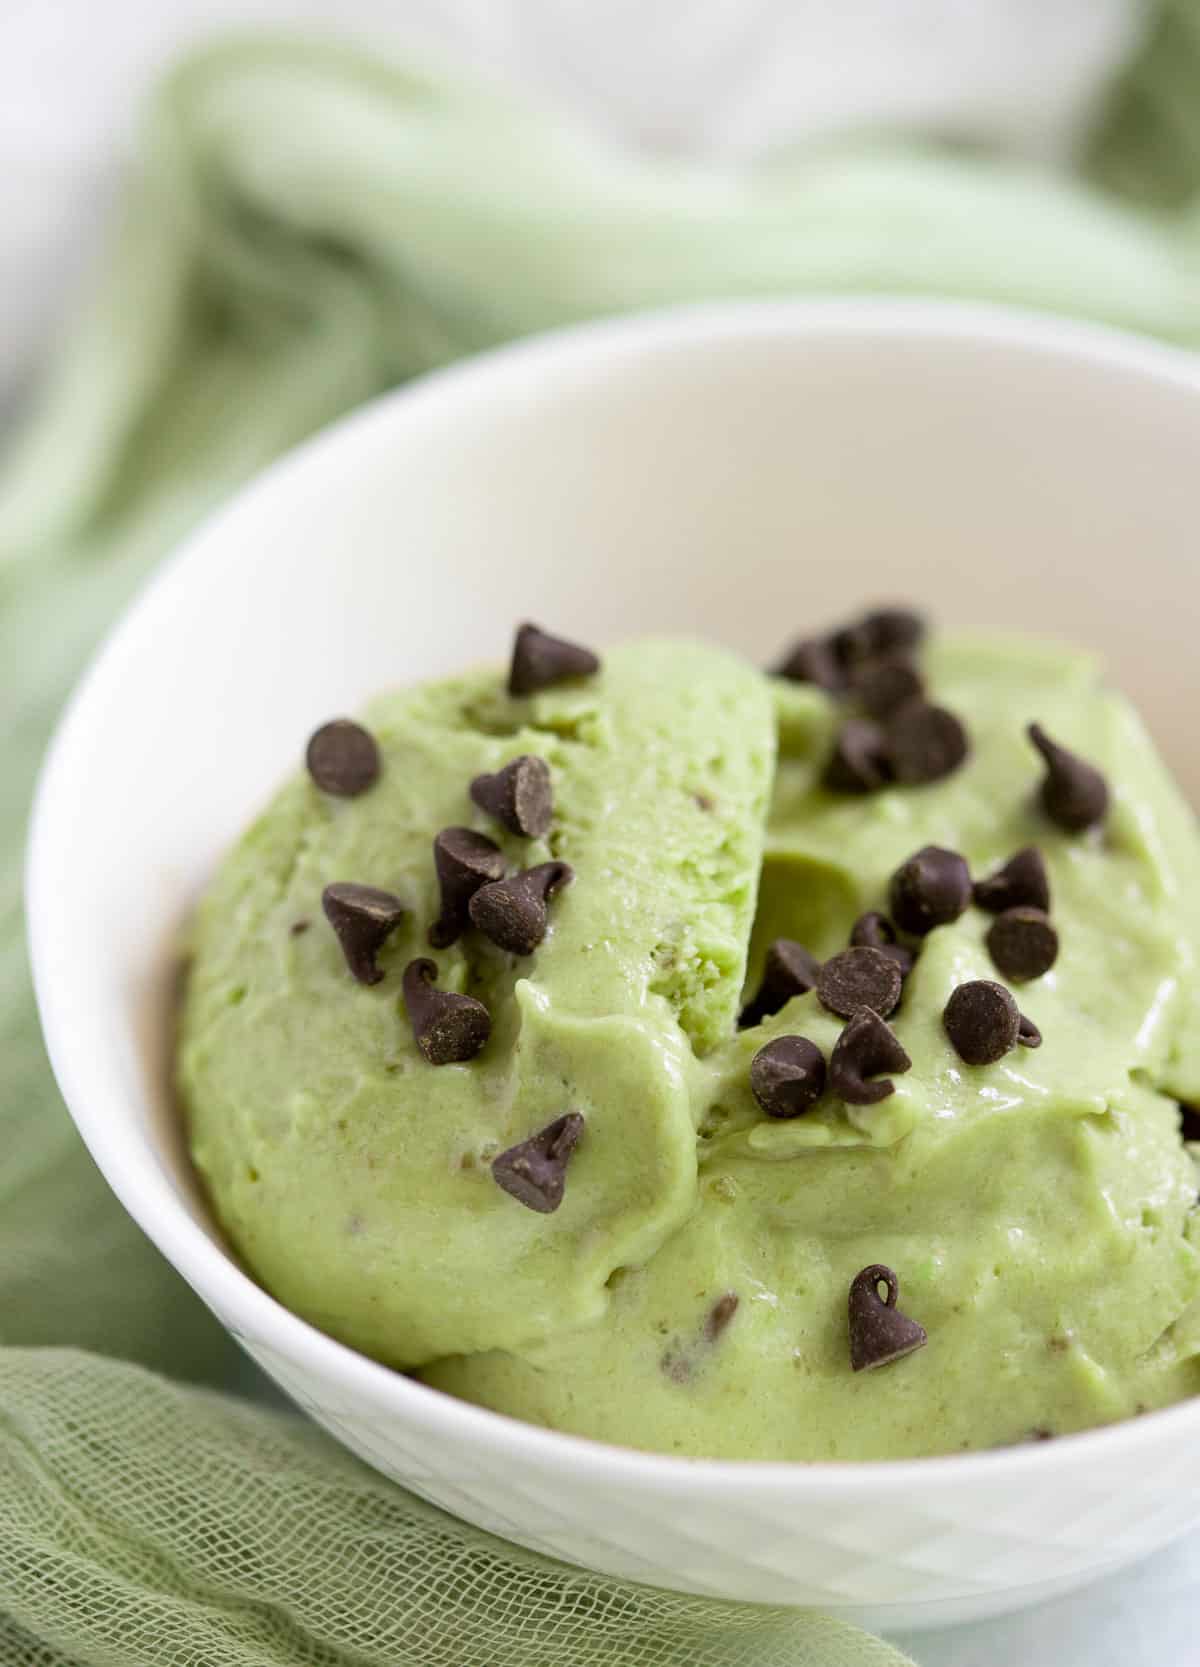 Avocado nice cream in white bowl topped with mini chocolate chips.
